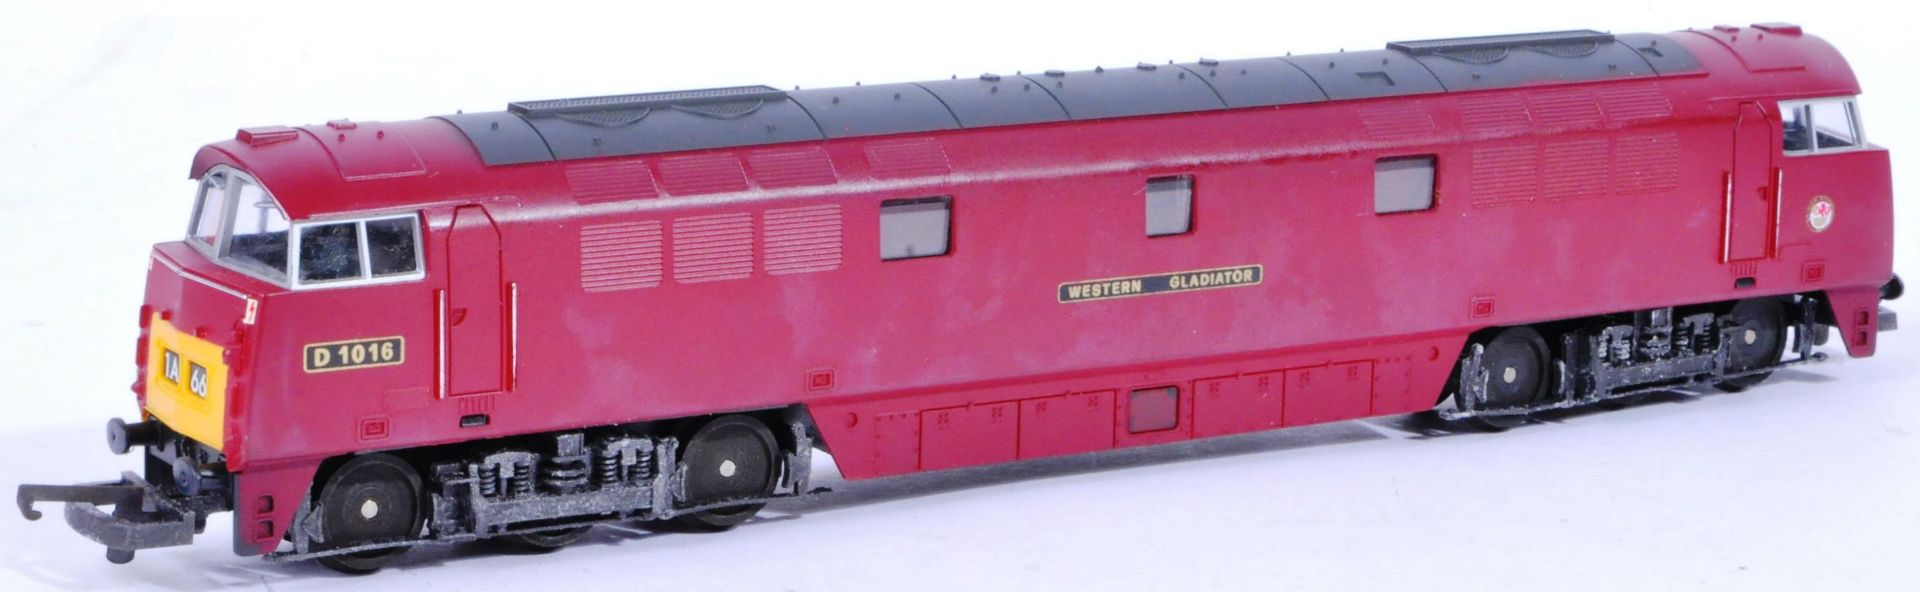 COLLECTION HORNBY 00 GAUGE MODEL RAILWAY DIESEL LOCOS & CARRIAGES - Image 4 of 9